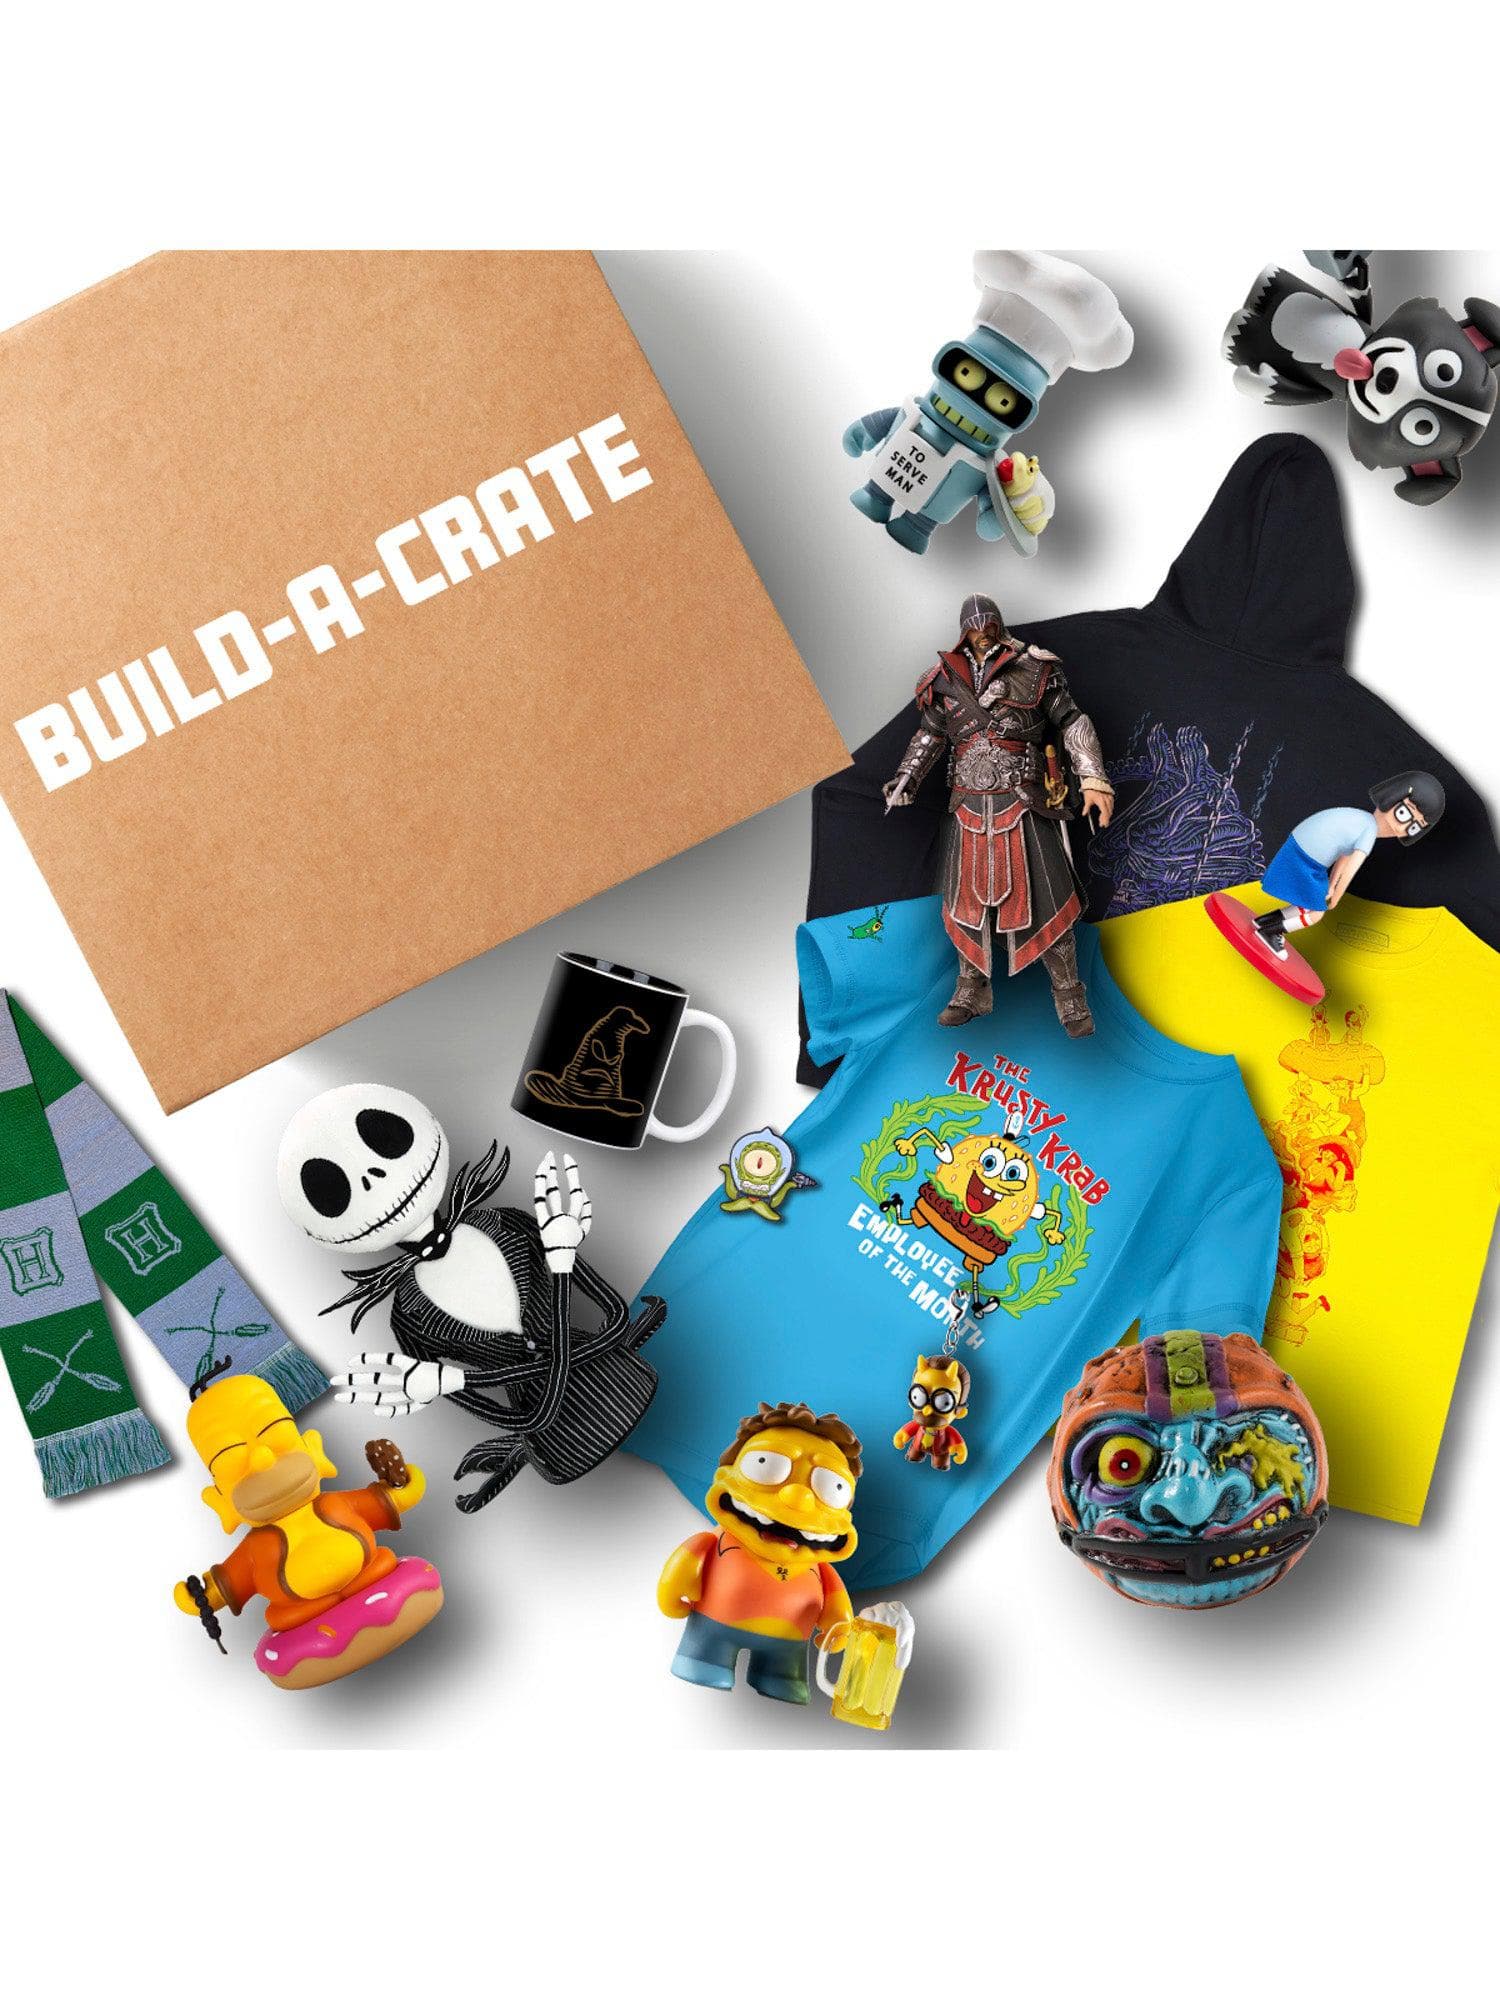 Build-A-Crate - 15 Items | Pop Culture Collectibles, Toys & Gifts